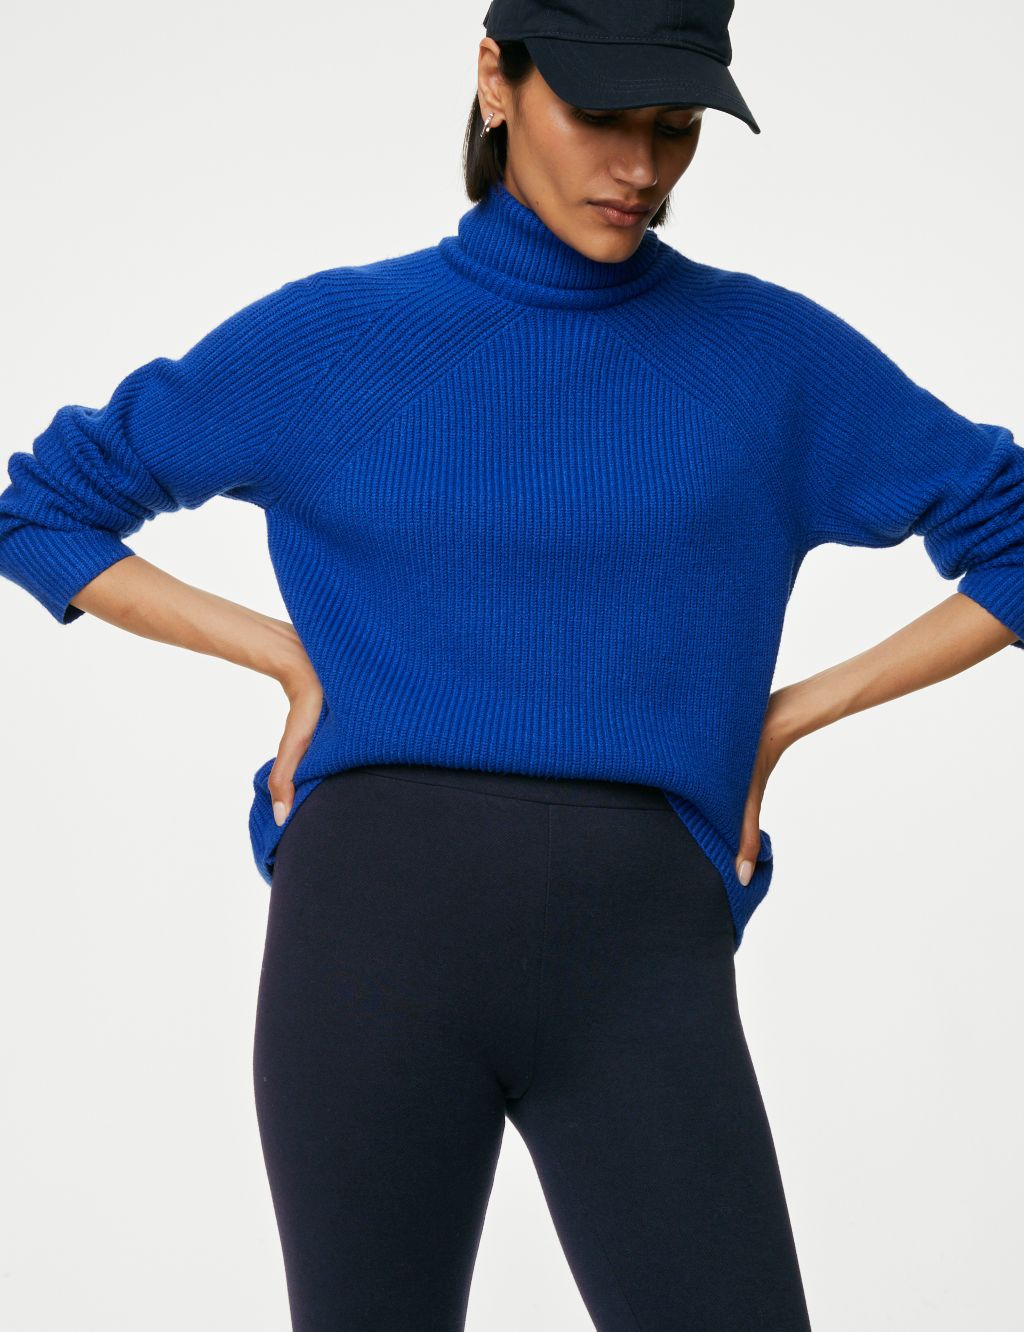 Thermal High Waisted Leggings image 4